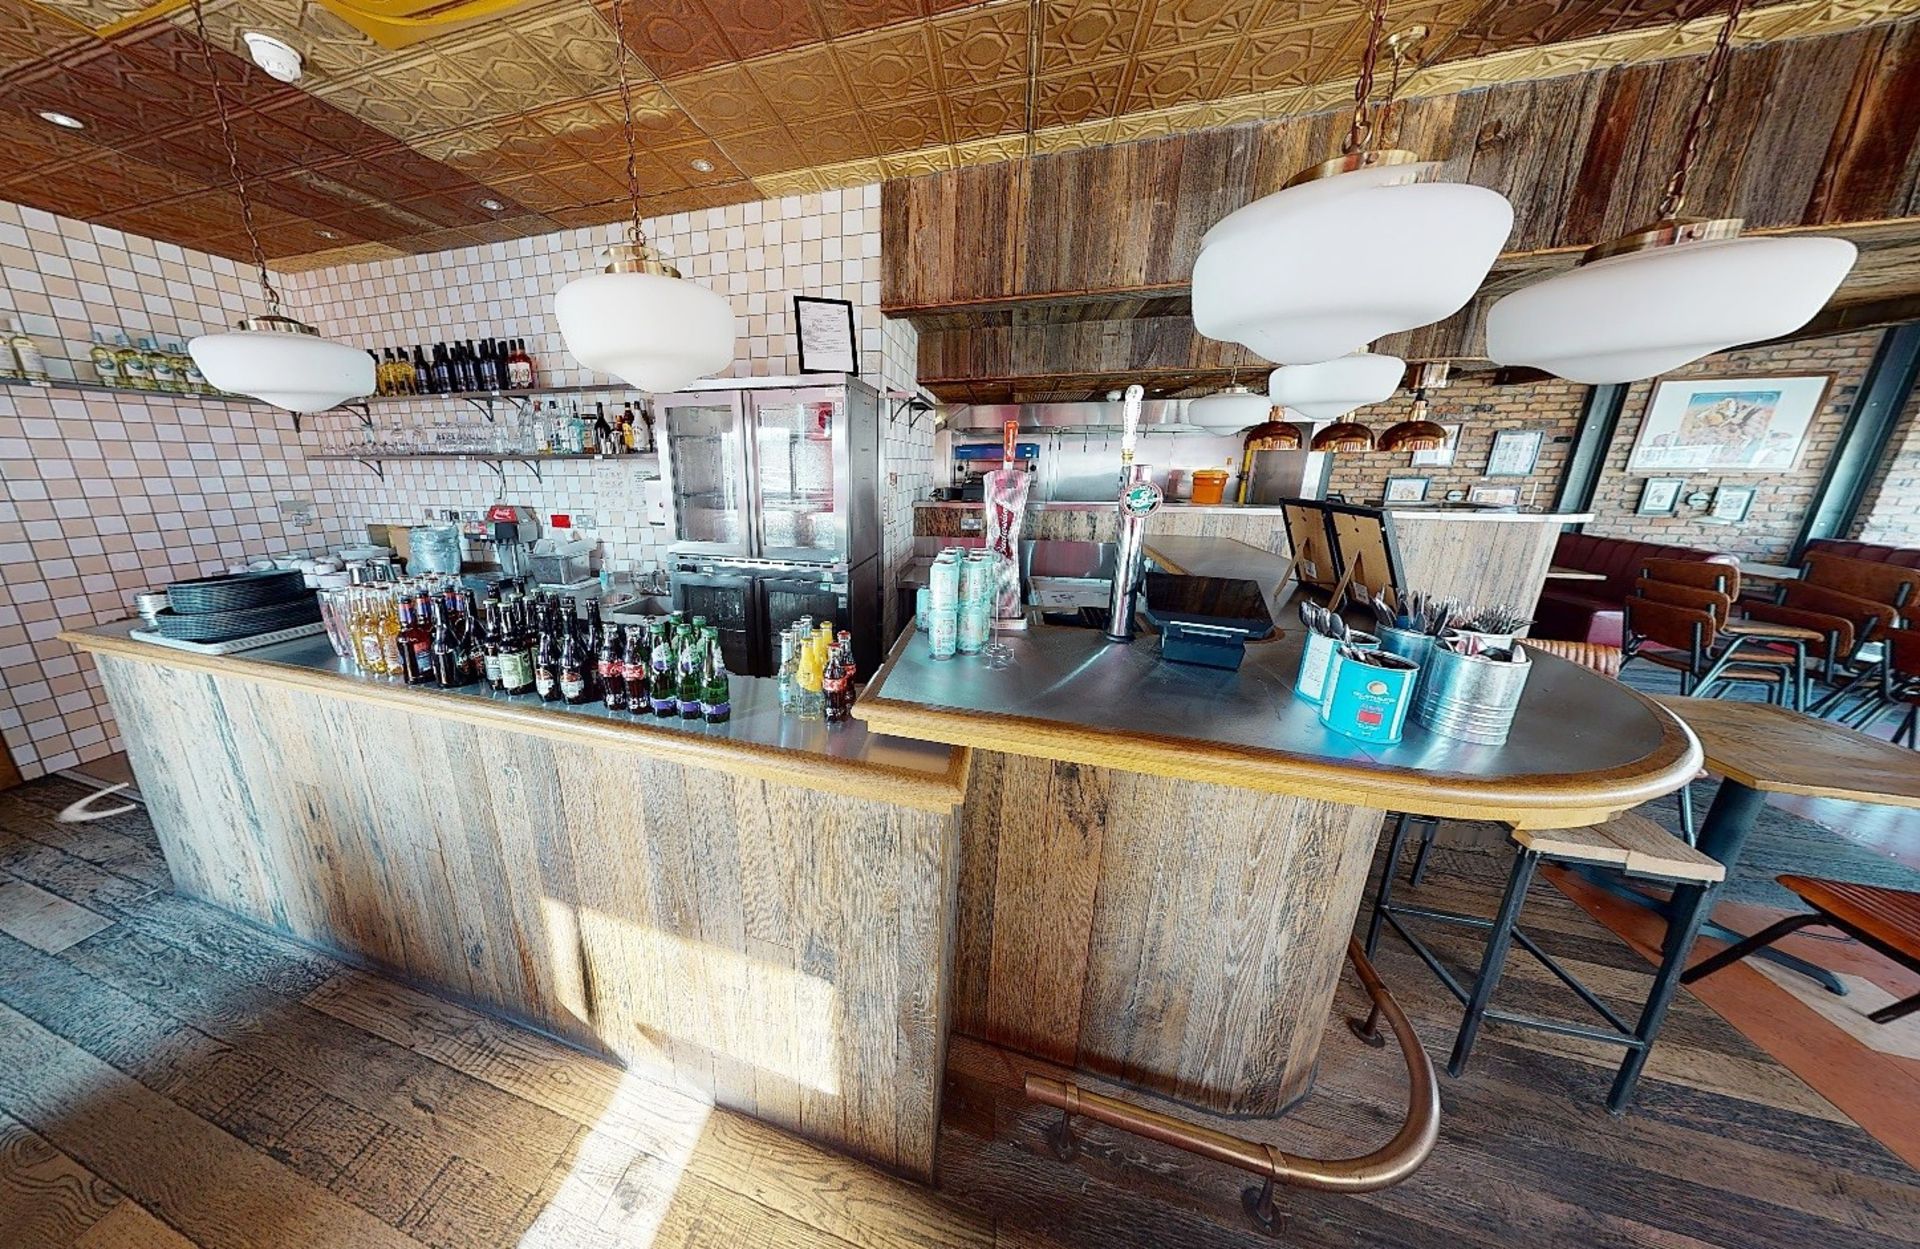 1 x Restaurant Bar With Reclaimed Timber Panelling - Dimensions: H120x600x500cm - BUYER TO REMOVE